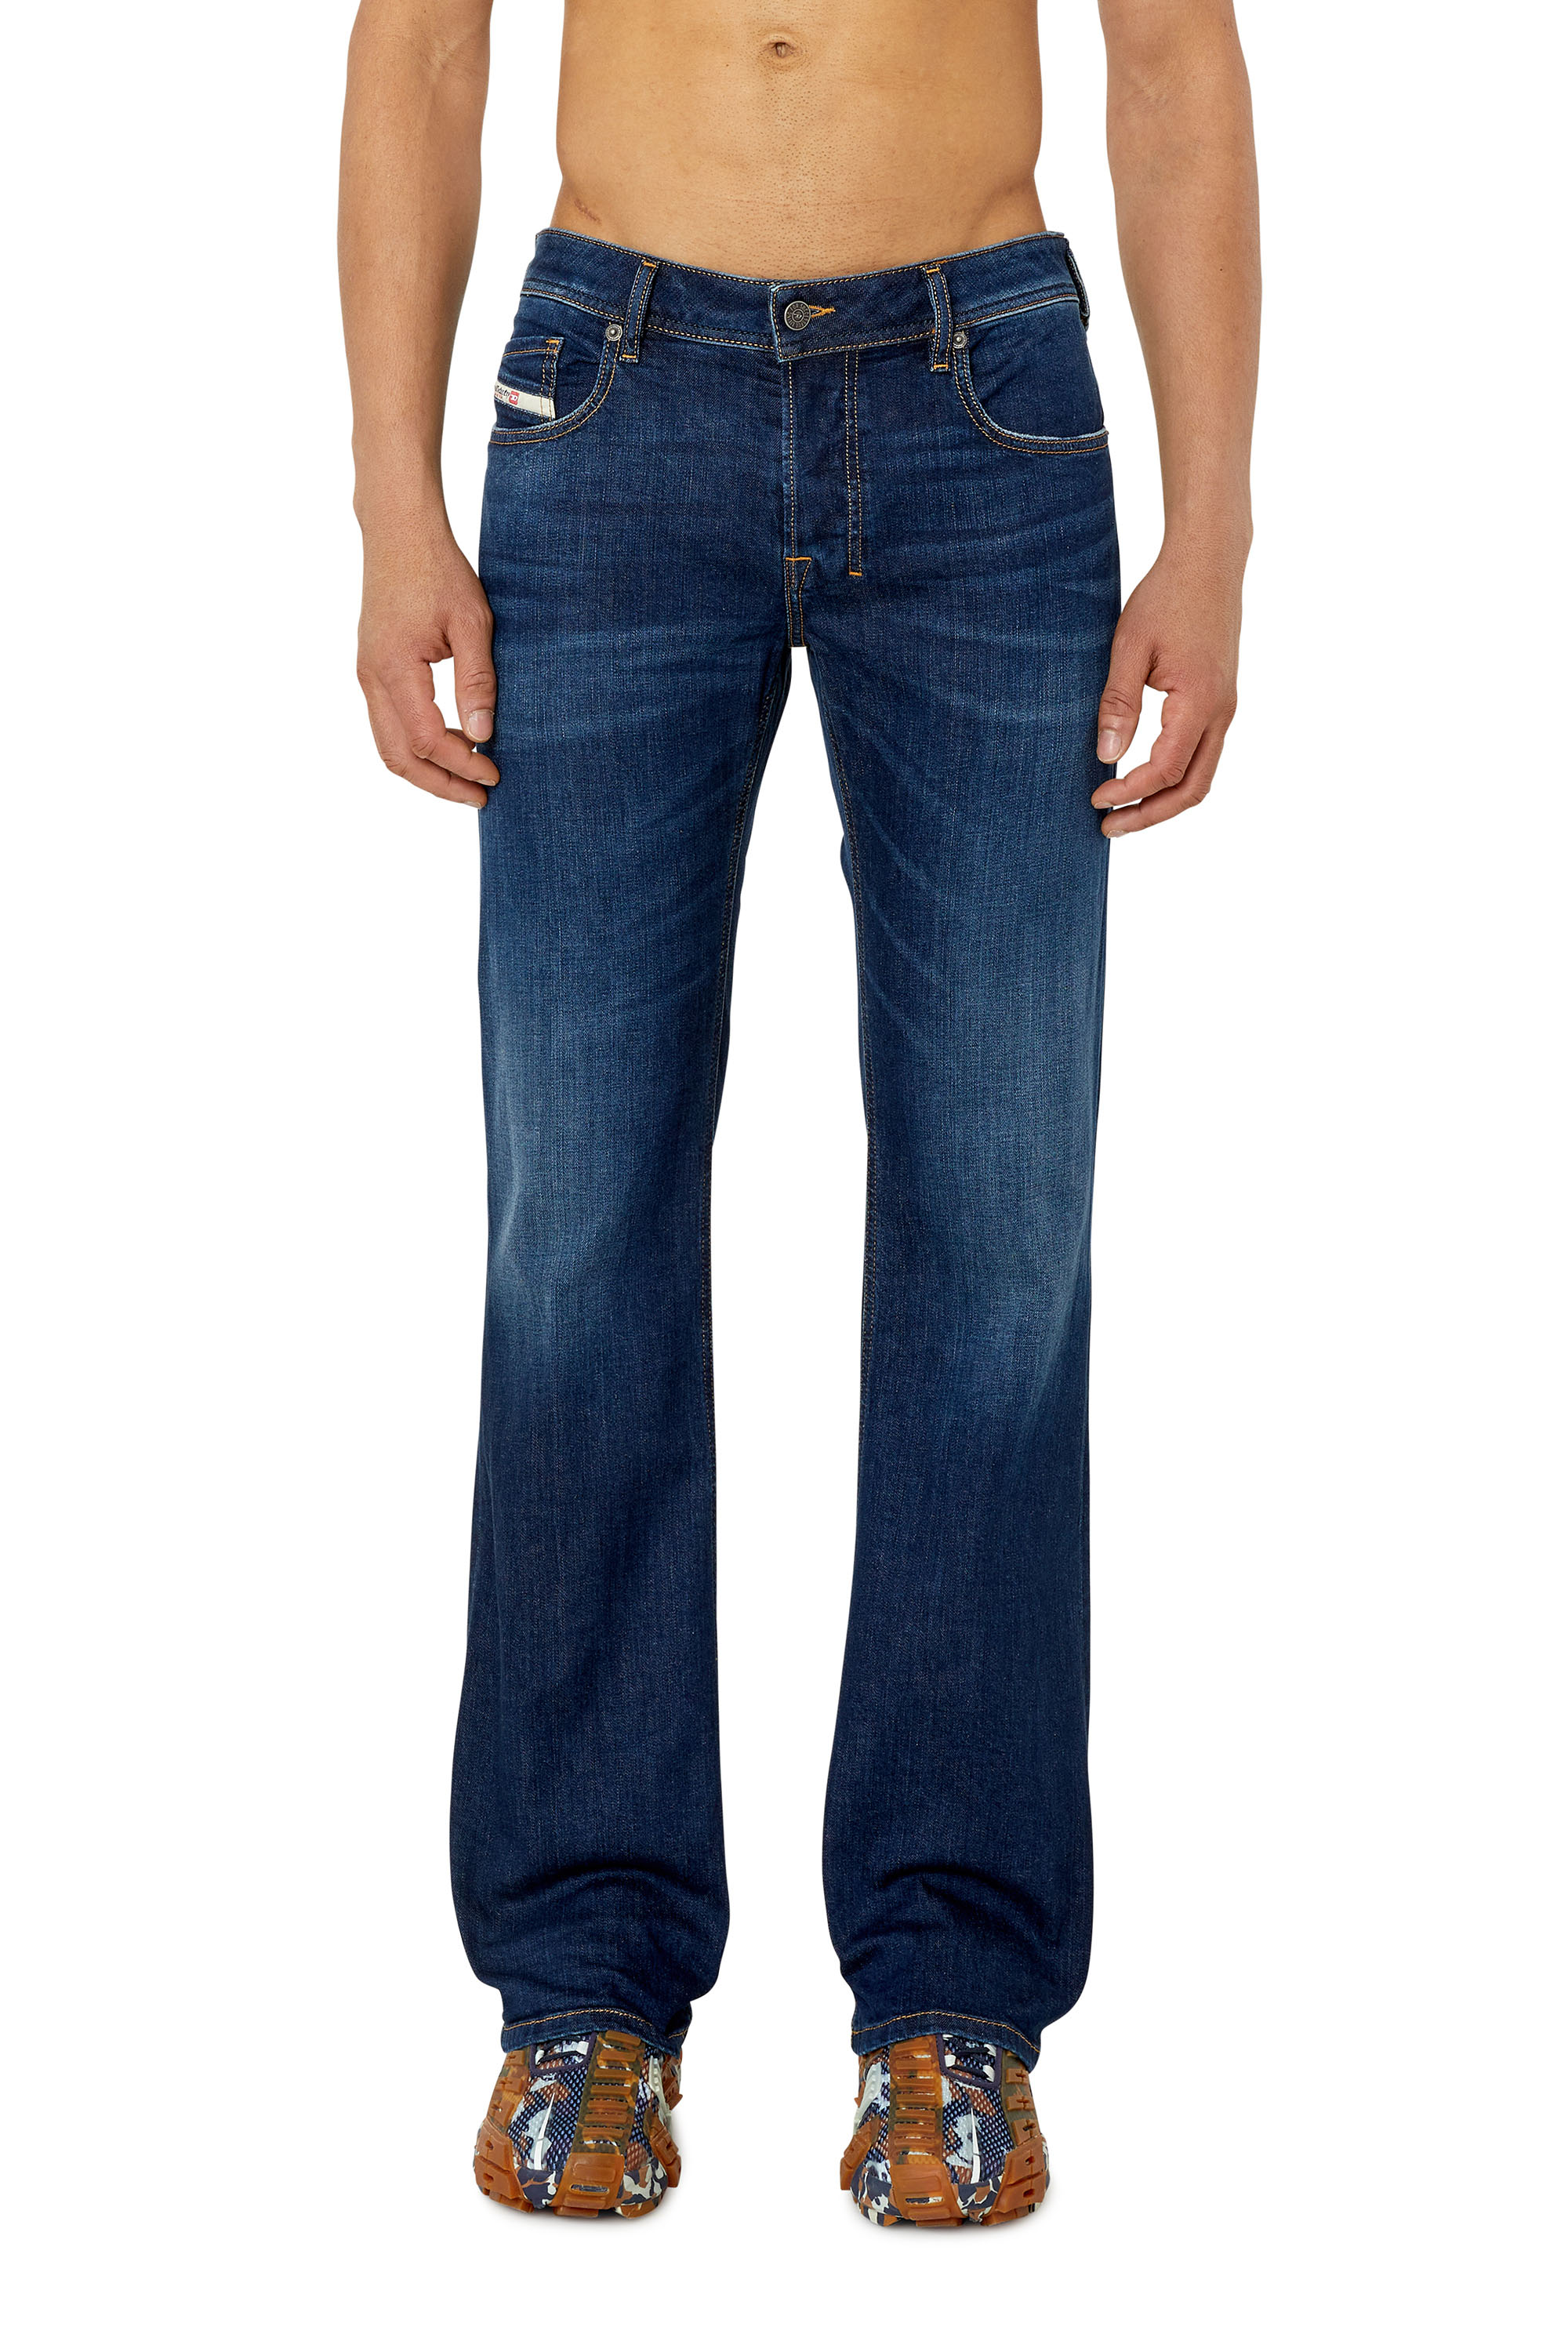 Diesel - Bootcut Jeans Zatiny 082AY,  - Image 2